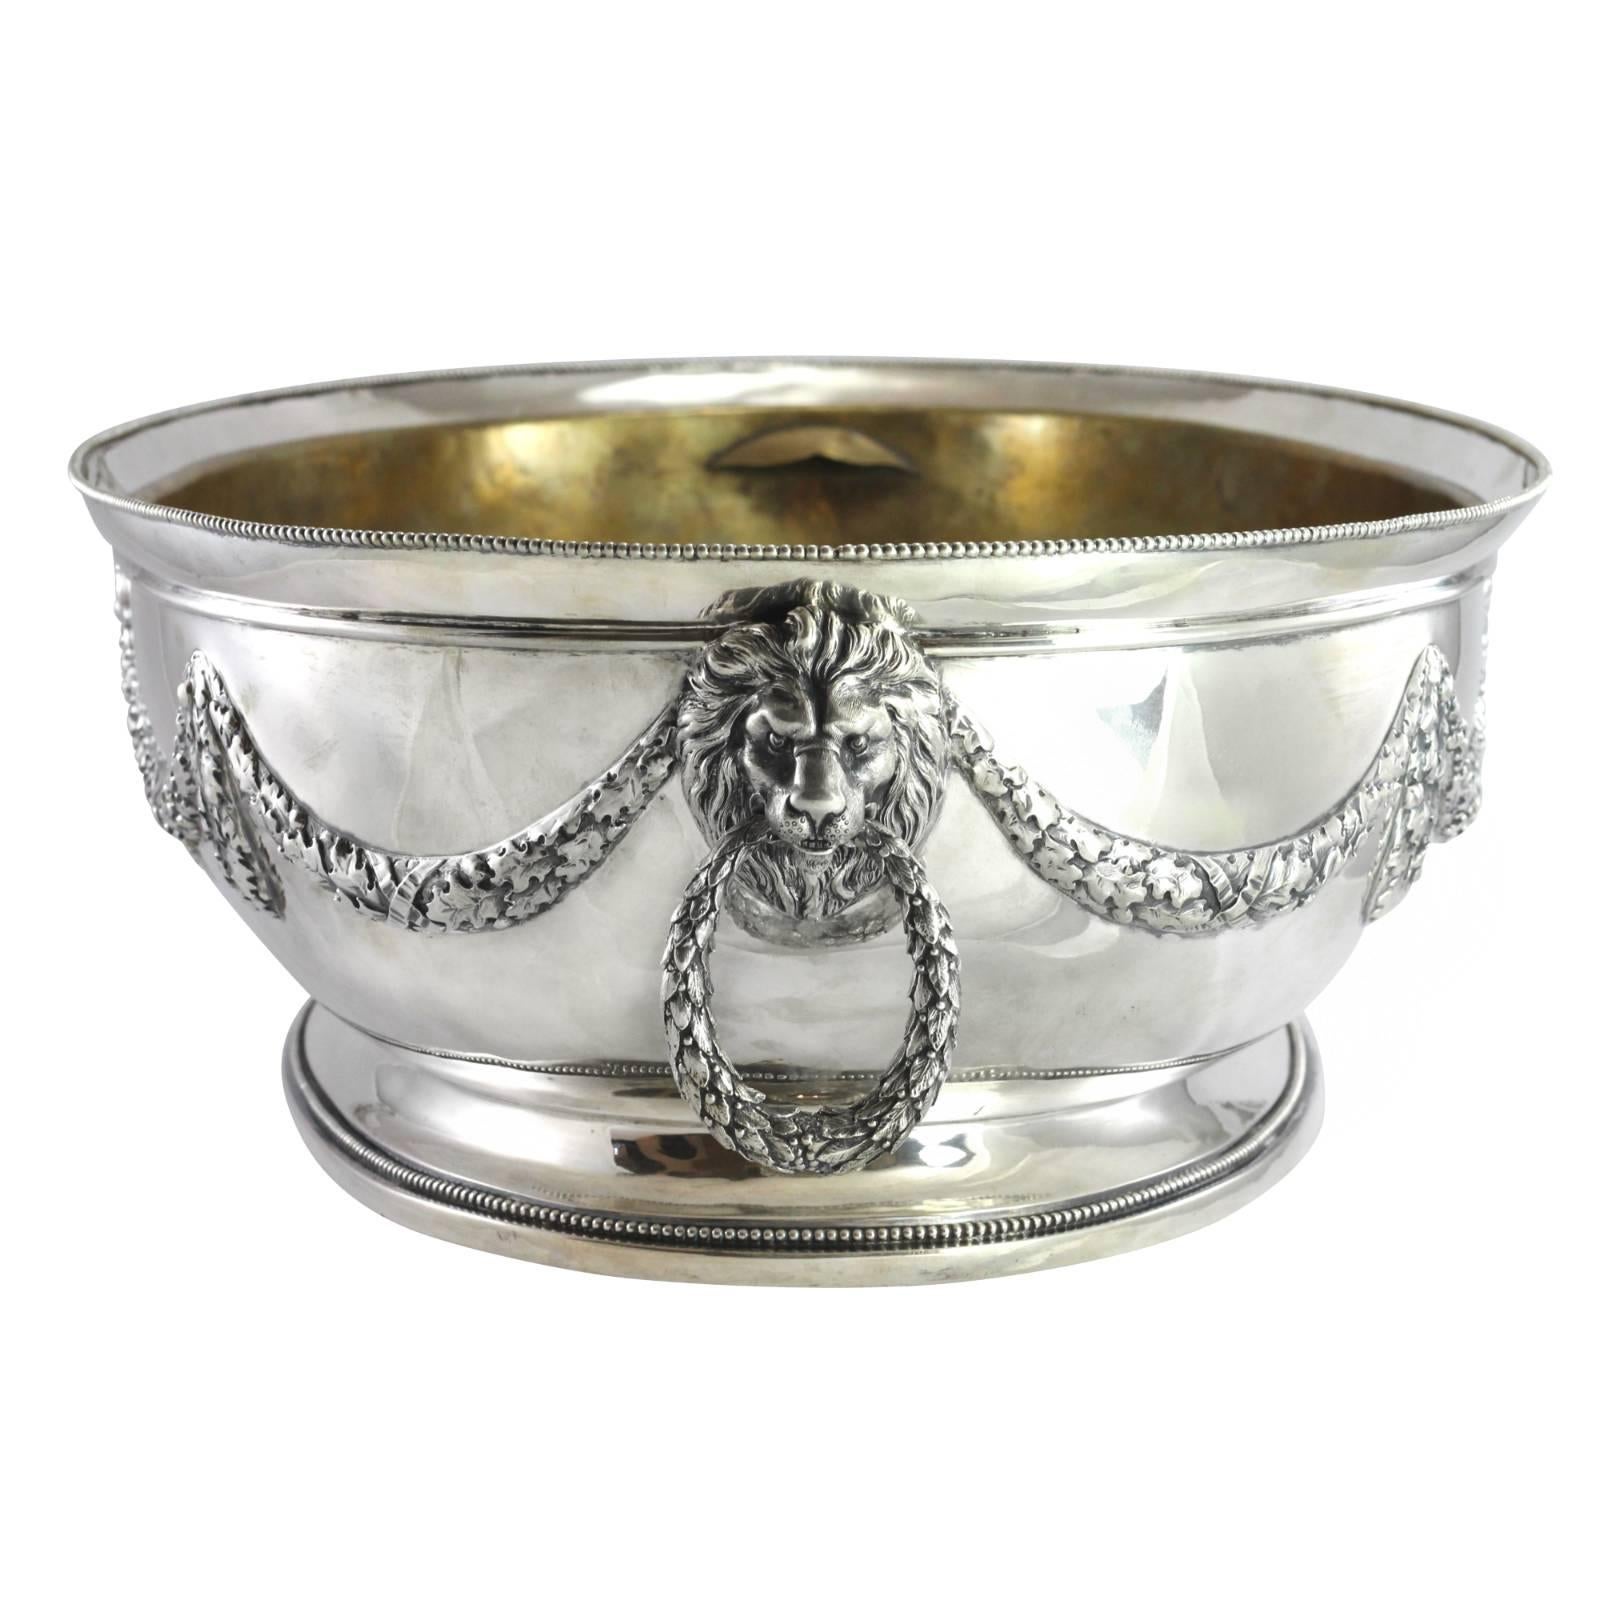 Early 20th Century German Continental Silver Presentation Wine Cooler For Sale 3